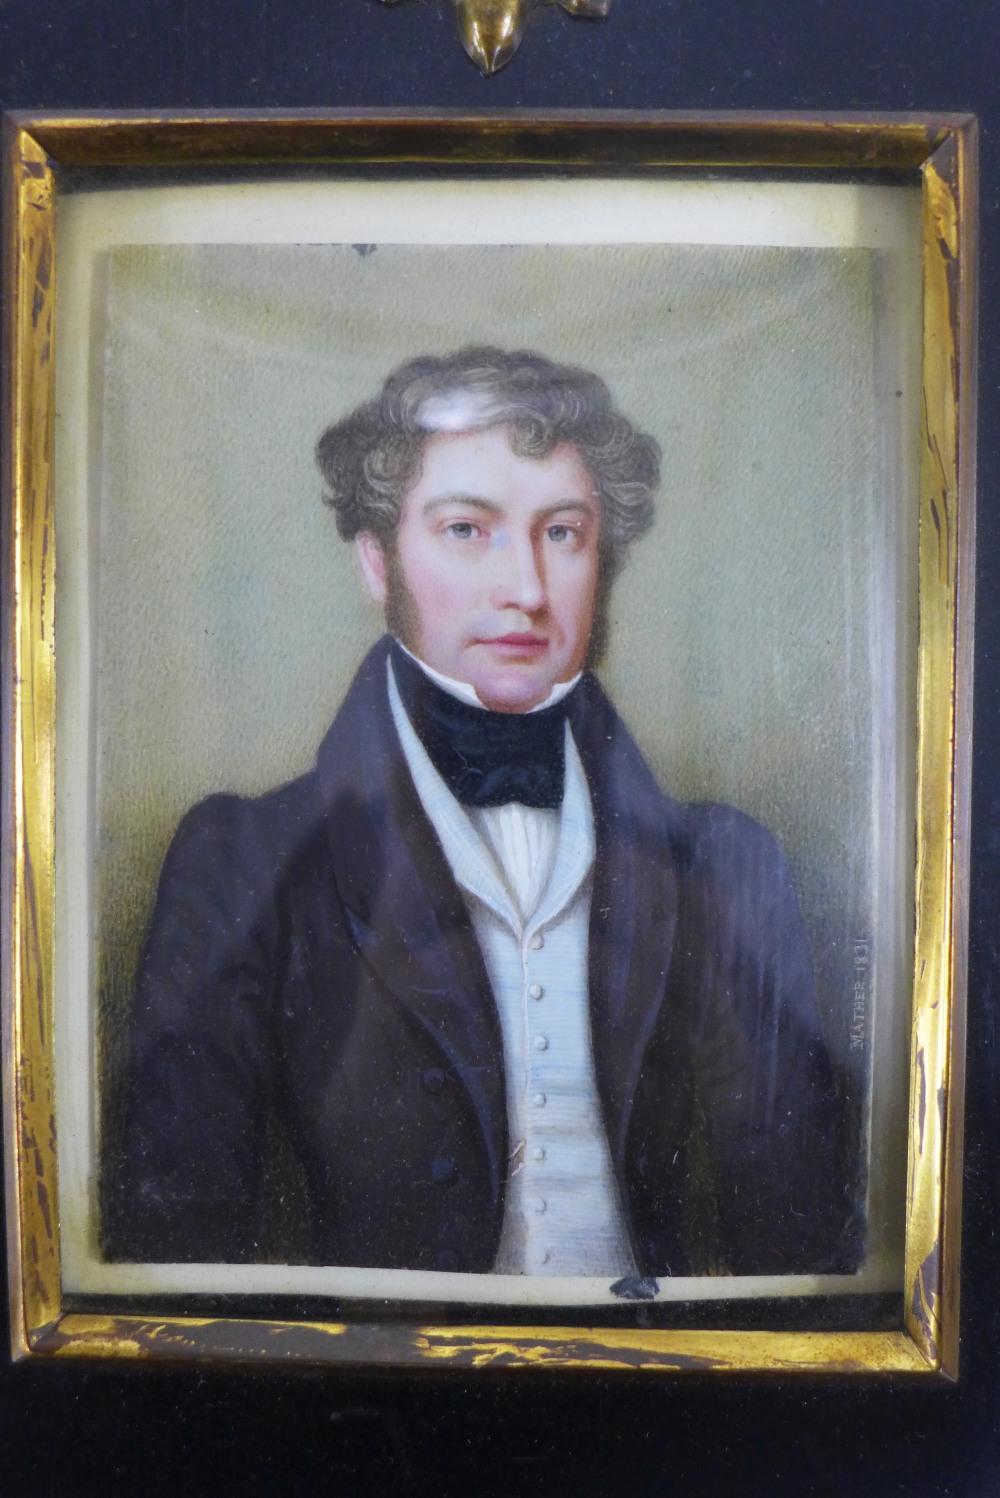 Four 19th century portrait miniatures, painted on ivory, to include Alexander Cunningham by - Image 2 of 5